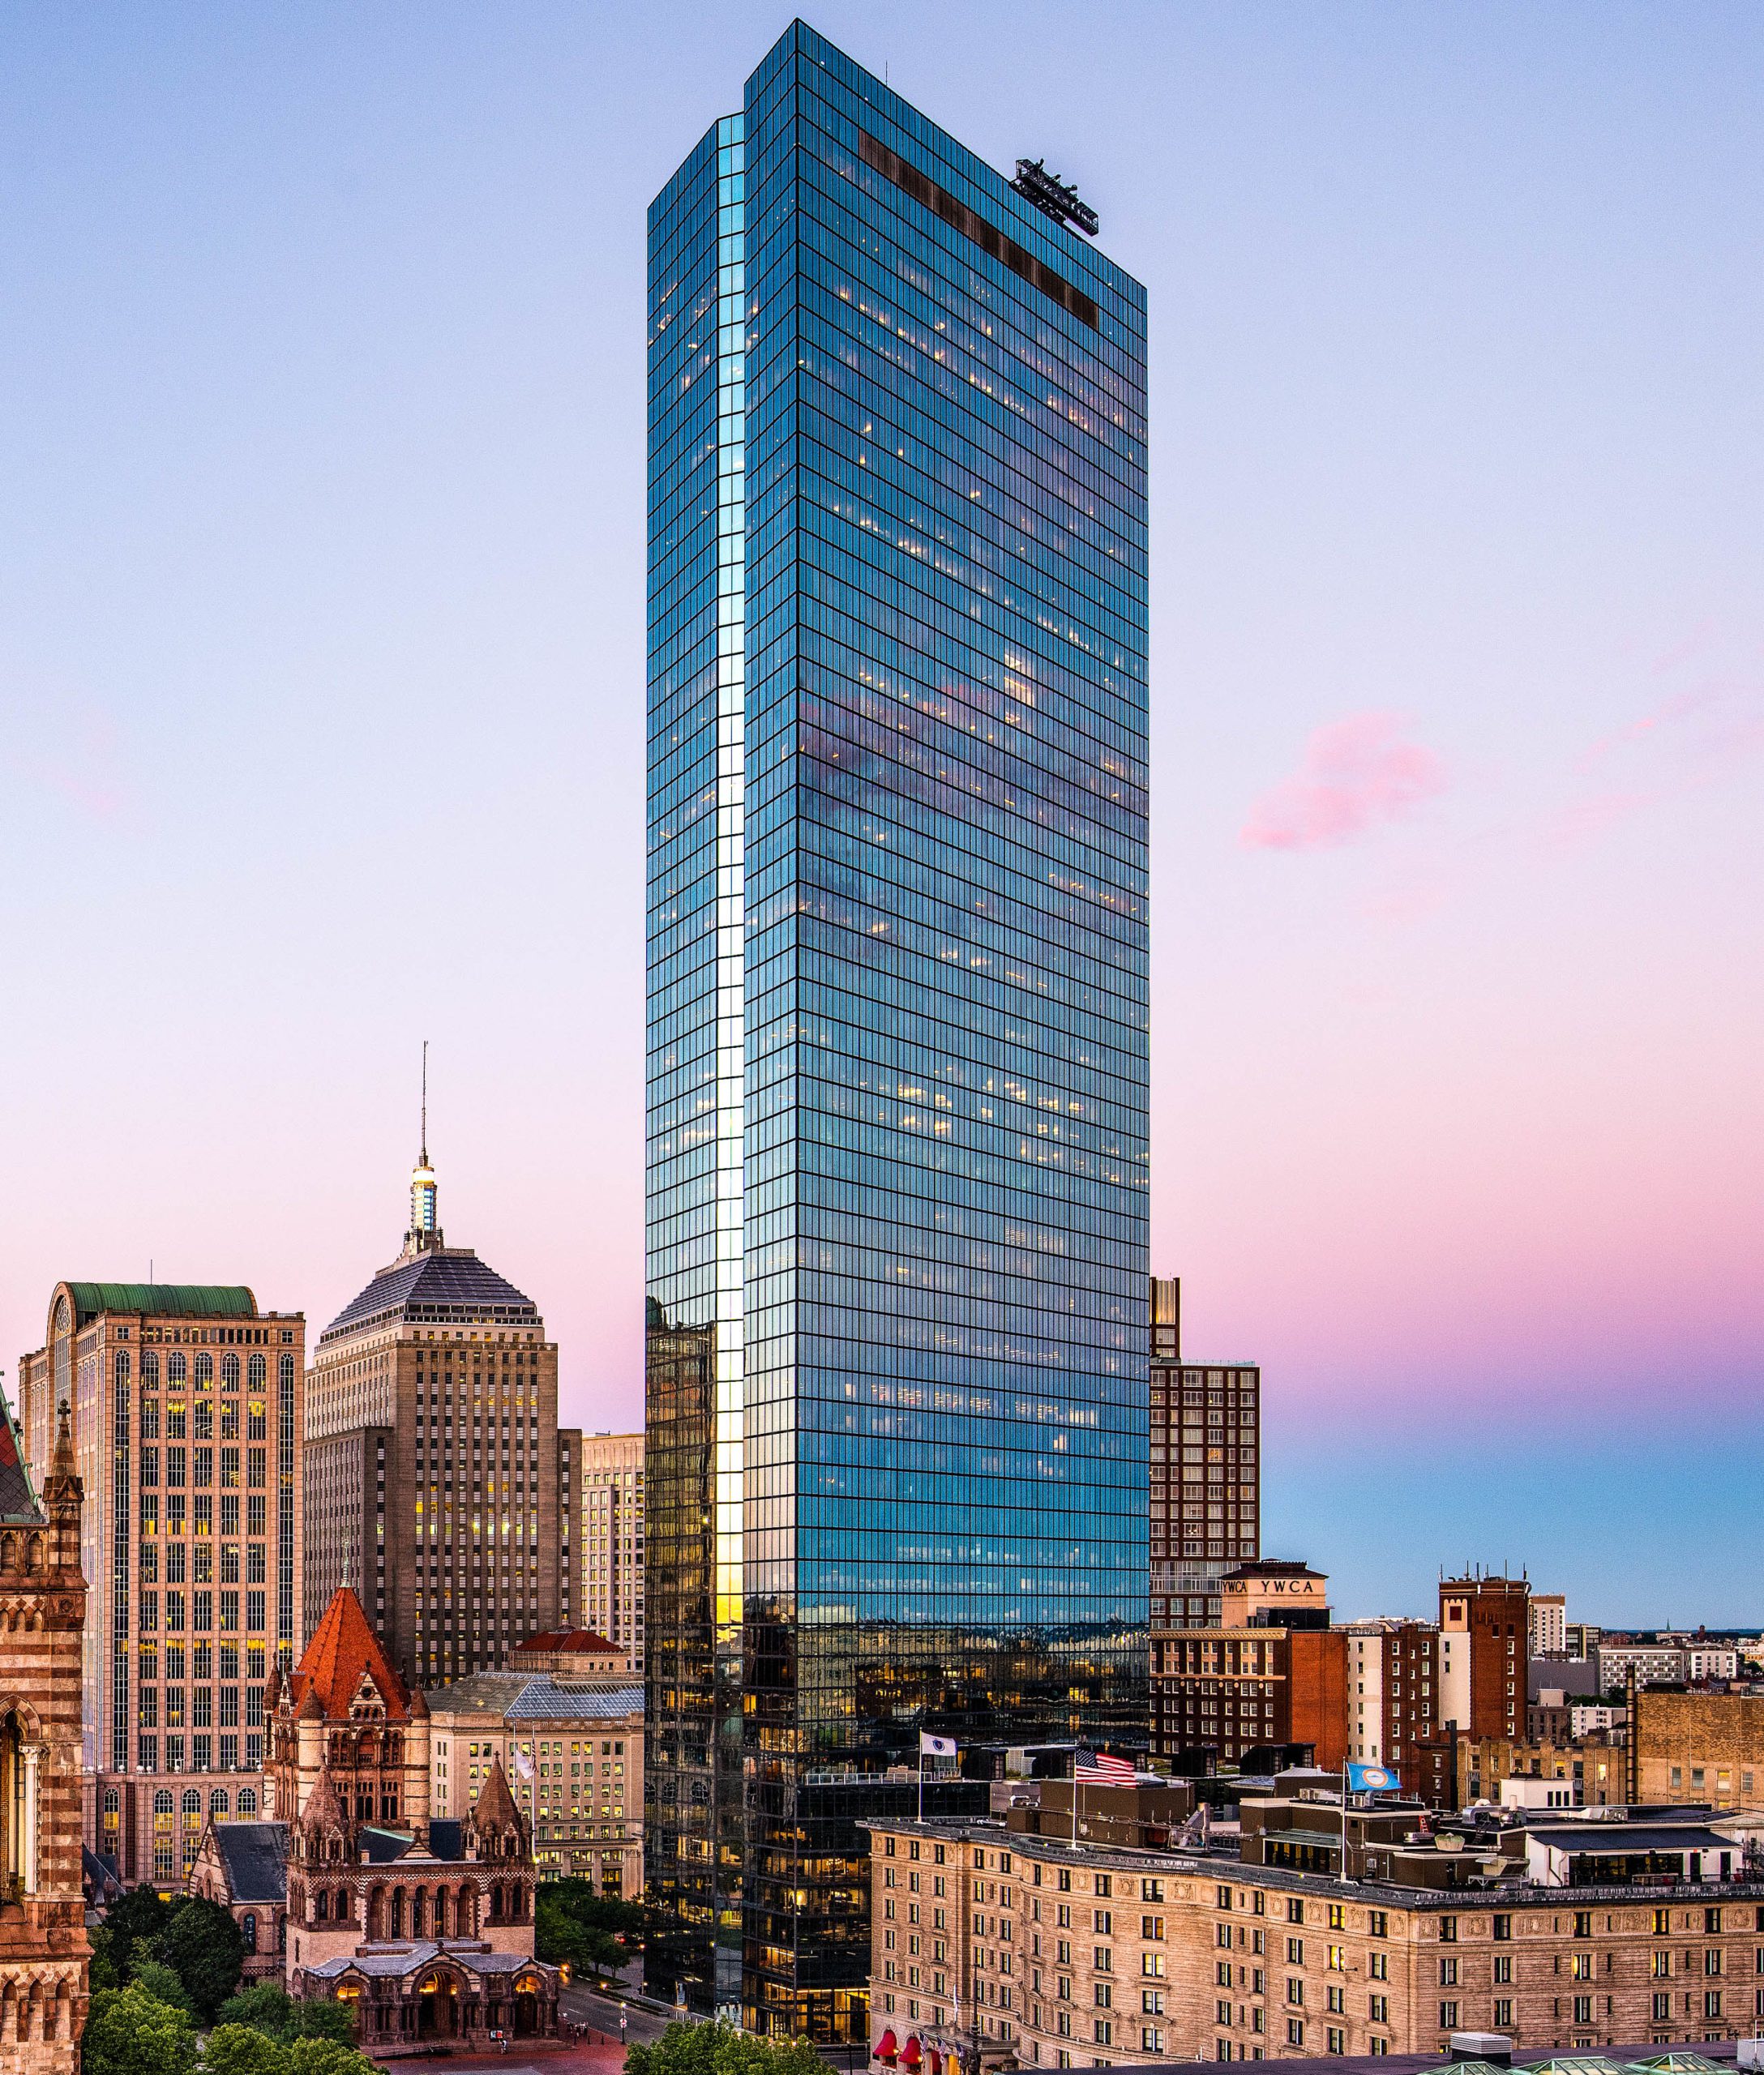 200 Clarendon Street featured at sunset.